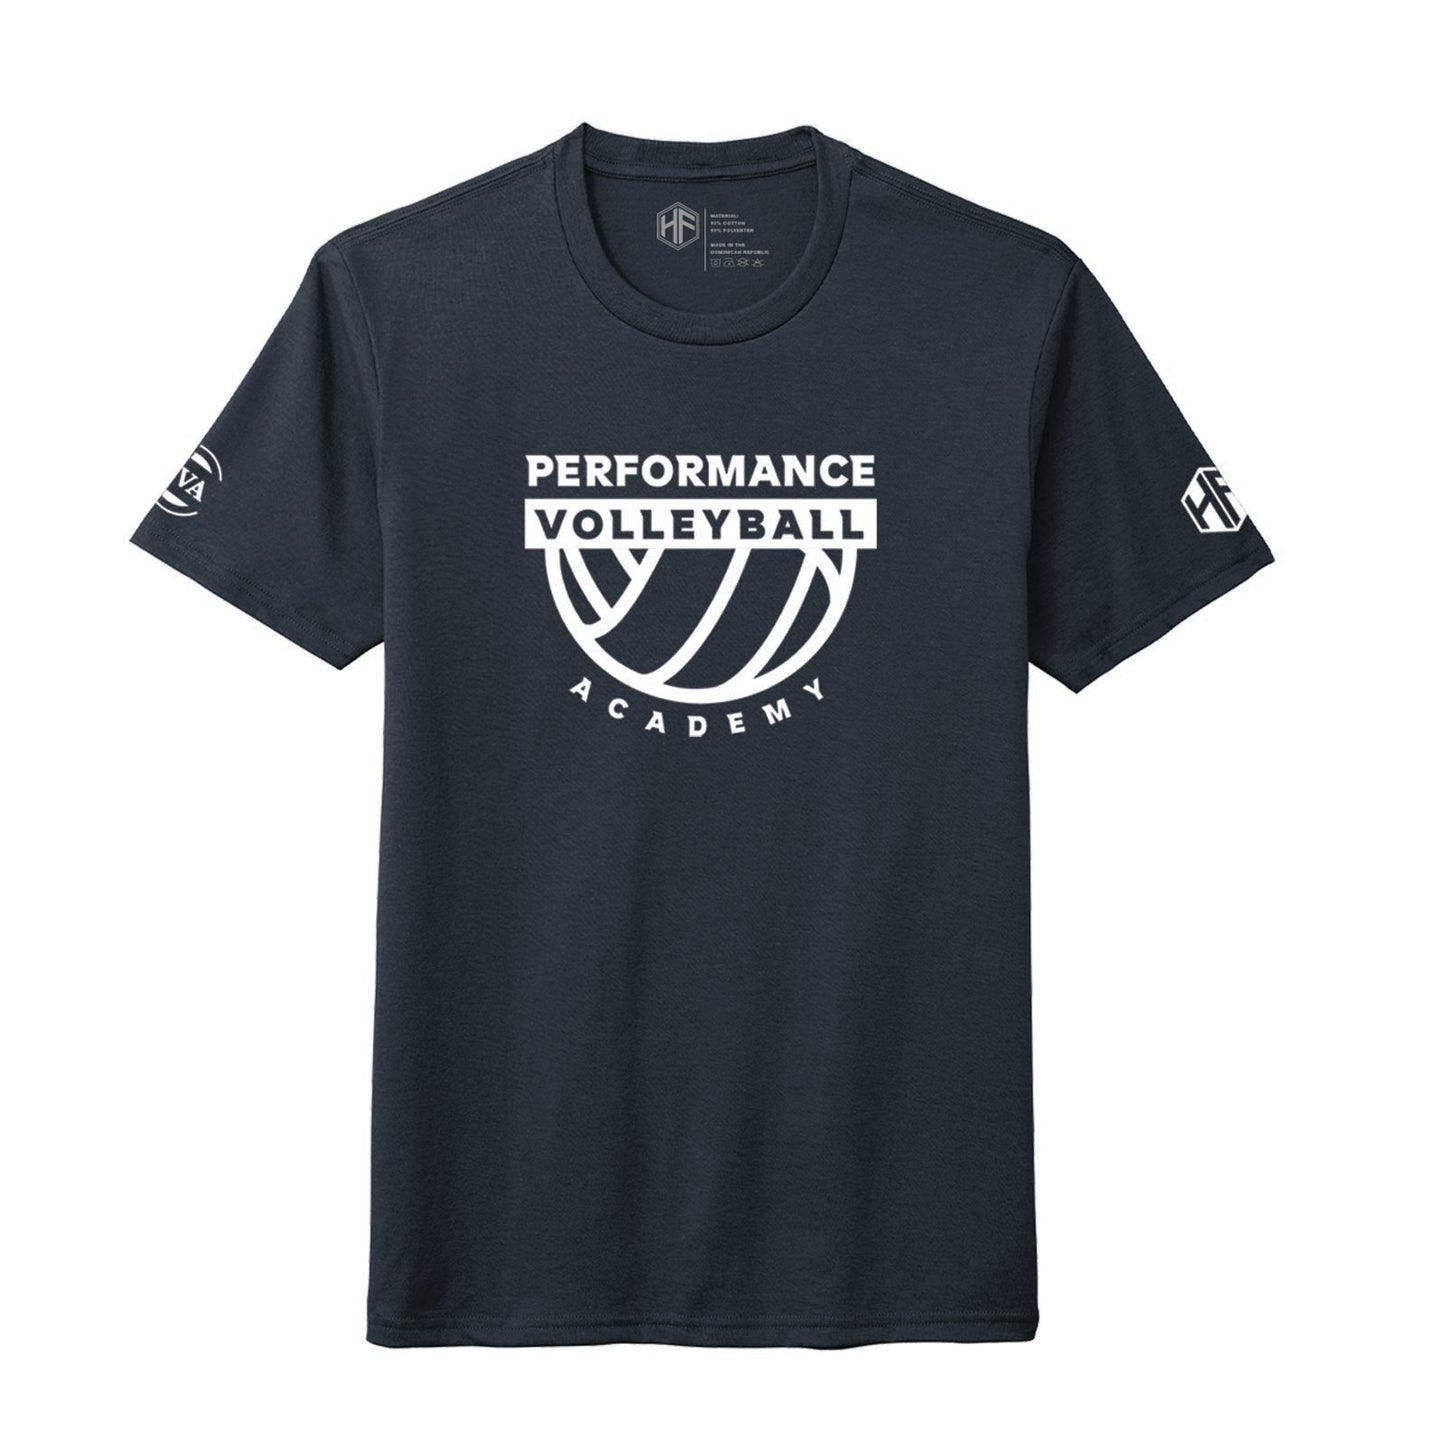 Performance Volleyball Tee